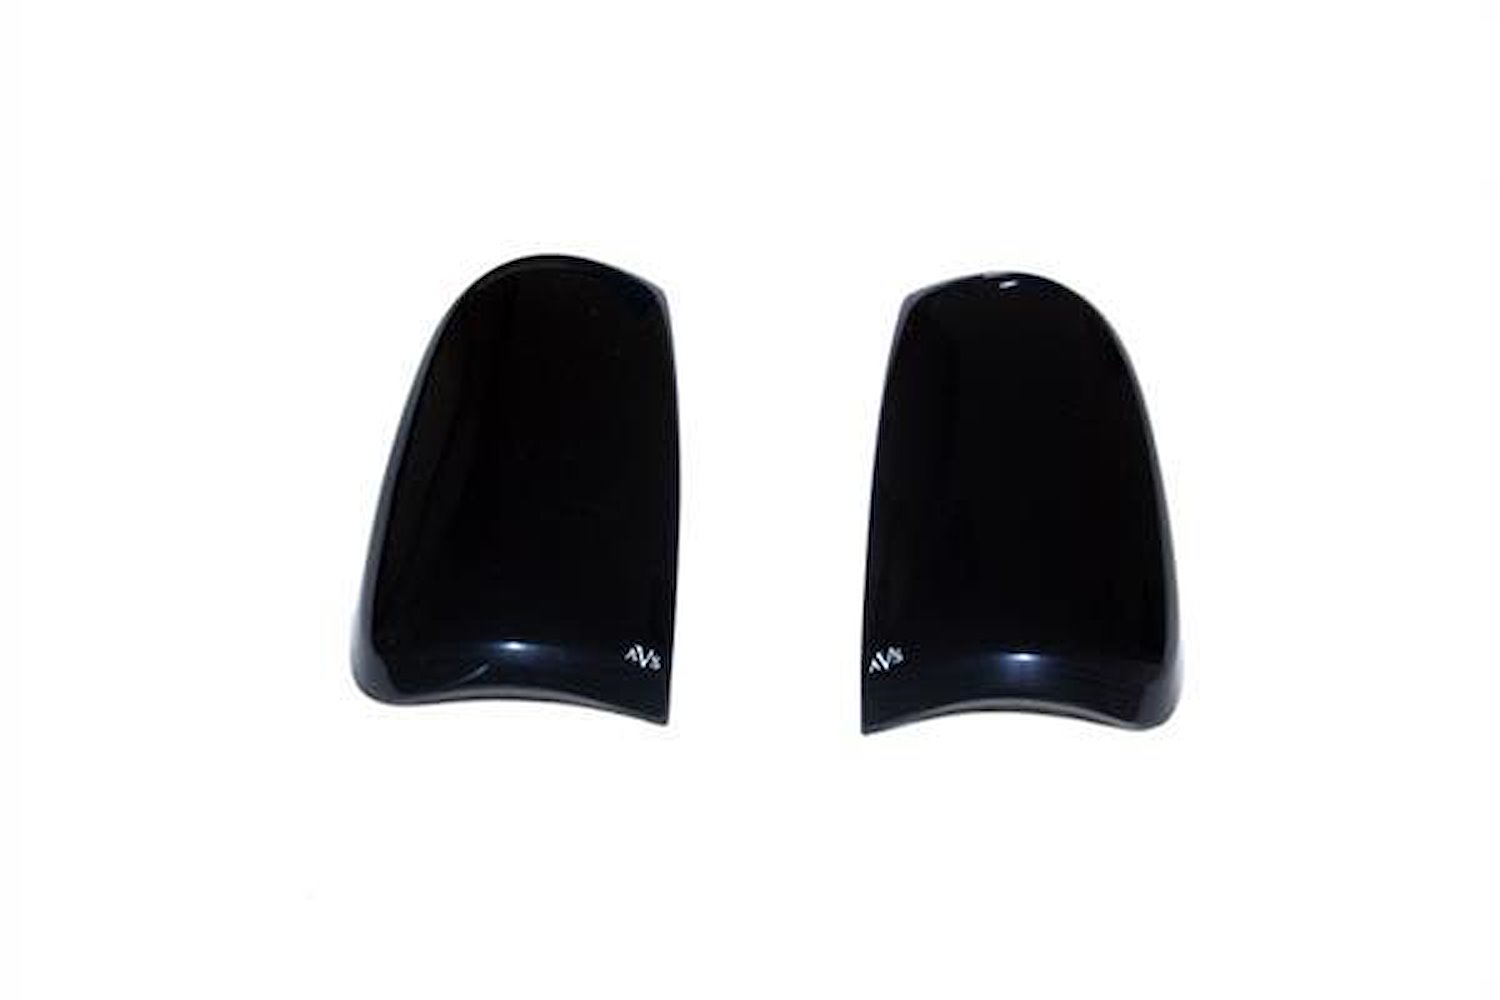 RAM 1500 TAILSHADES COVER